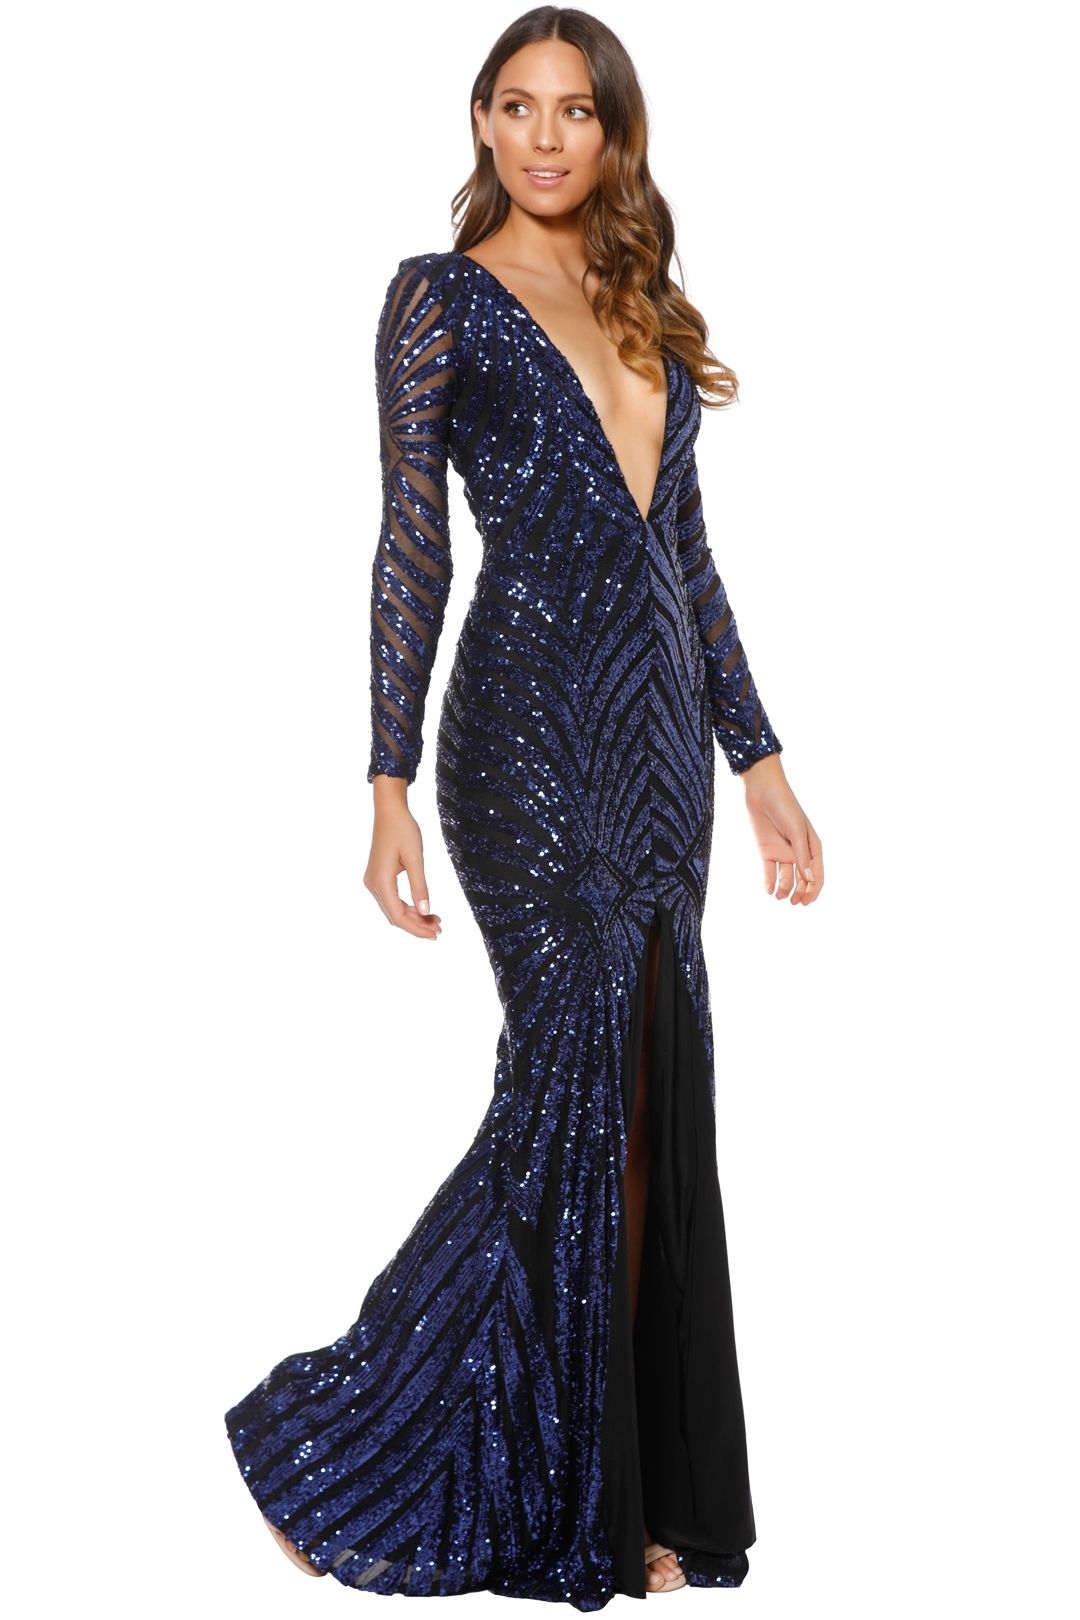 Ae'lkemi - Art Deco Sequin Gown - Navy - Side